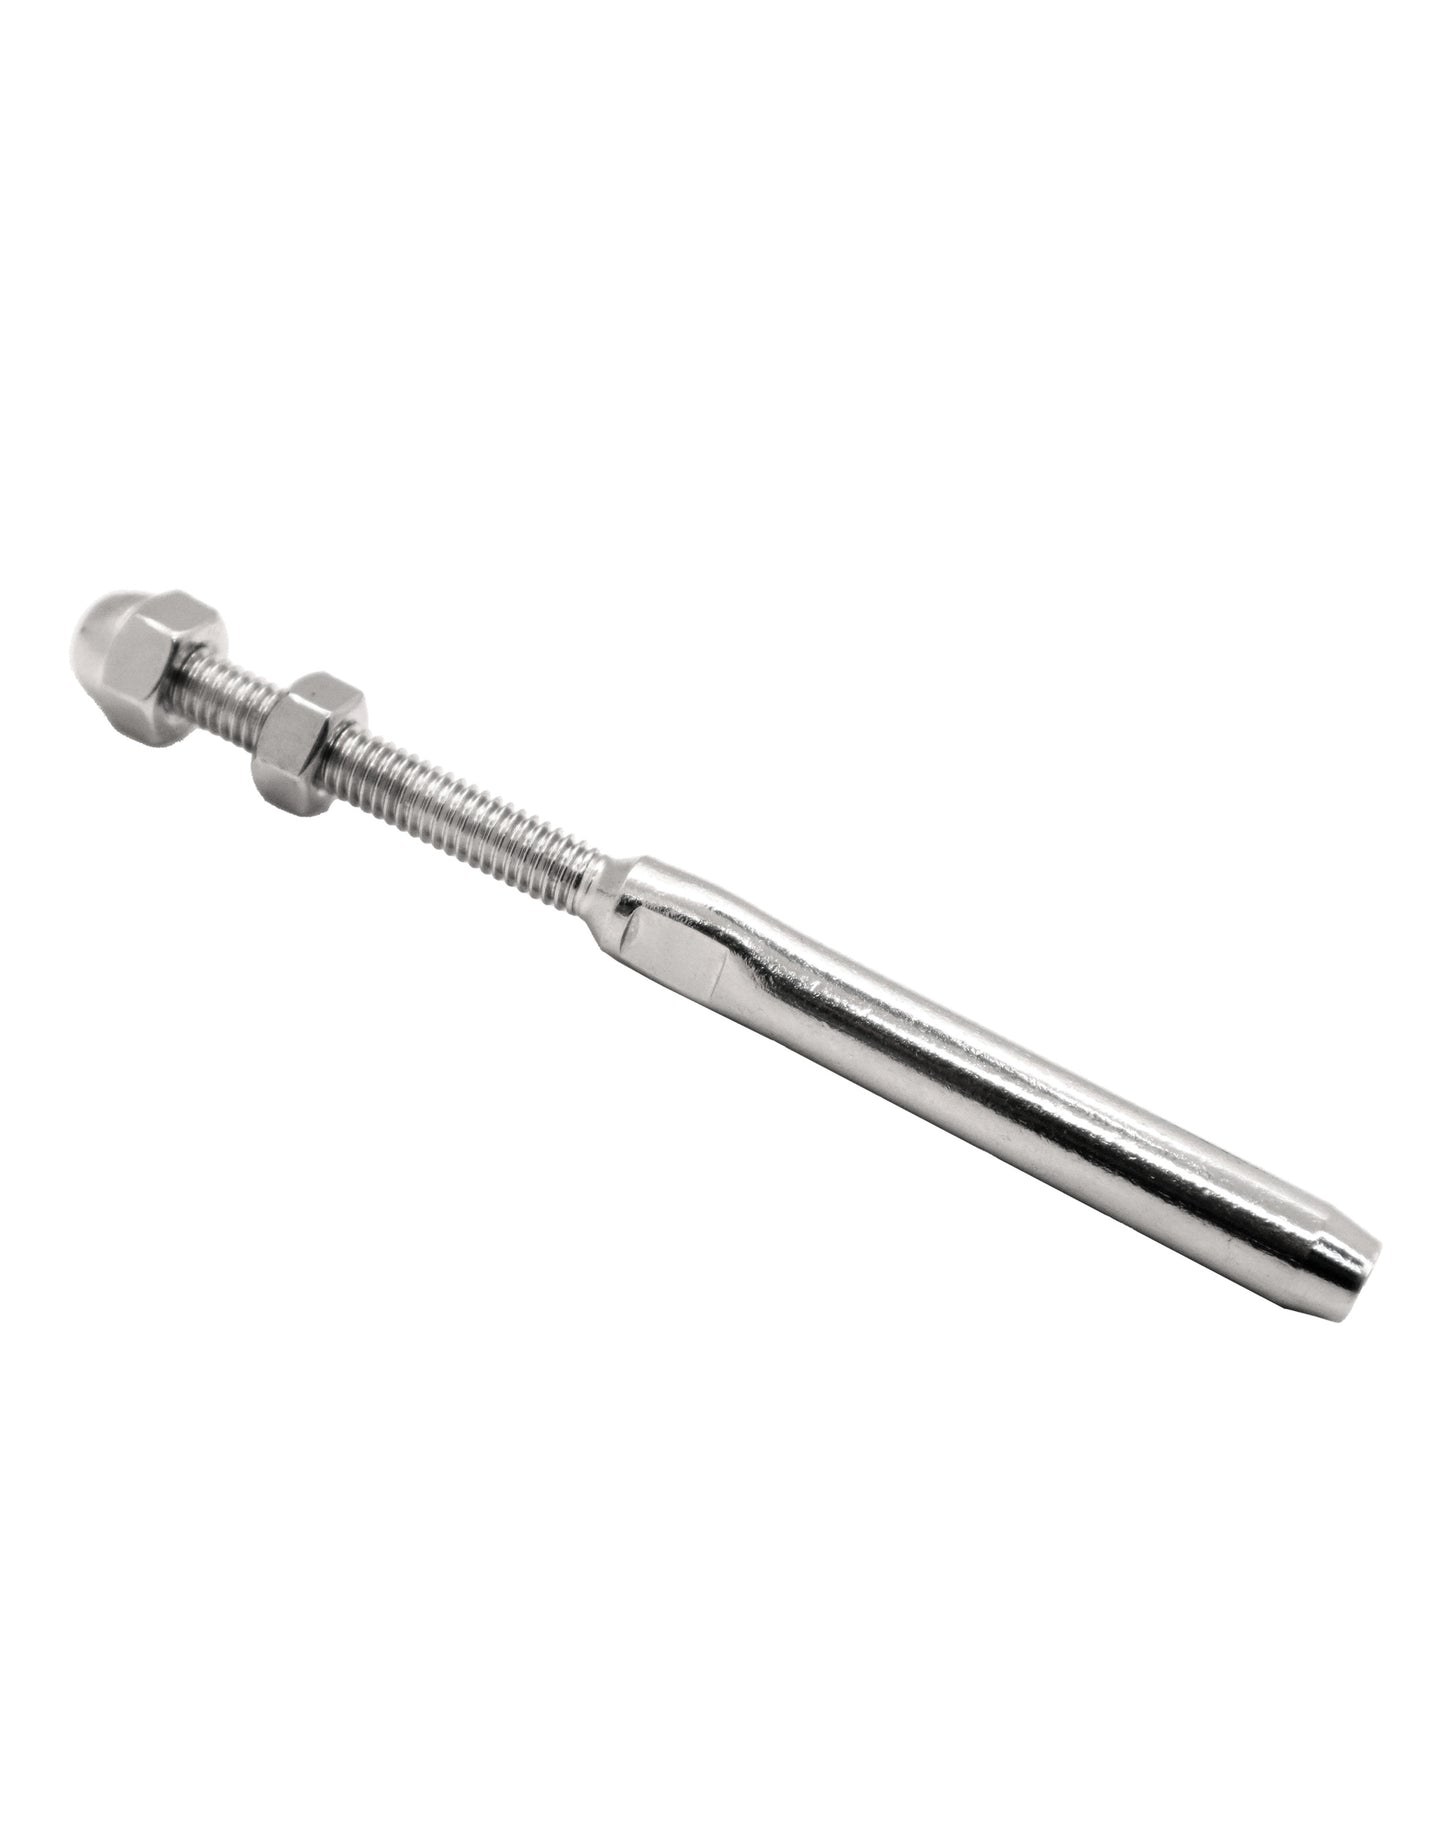 Hand Swage Threaded Stud for 1/4" Stainless Steel Cable (C1036-014) - SHEMONICO